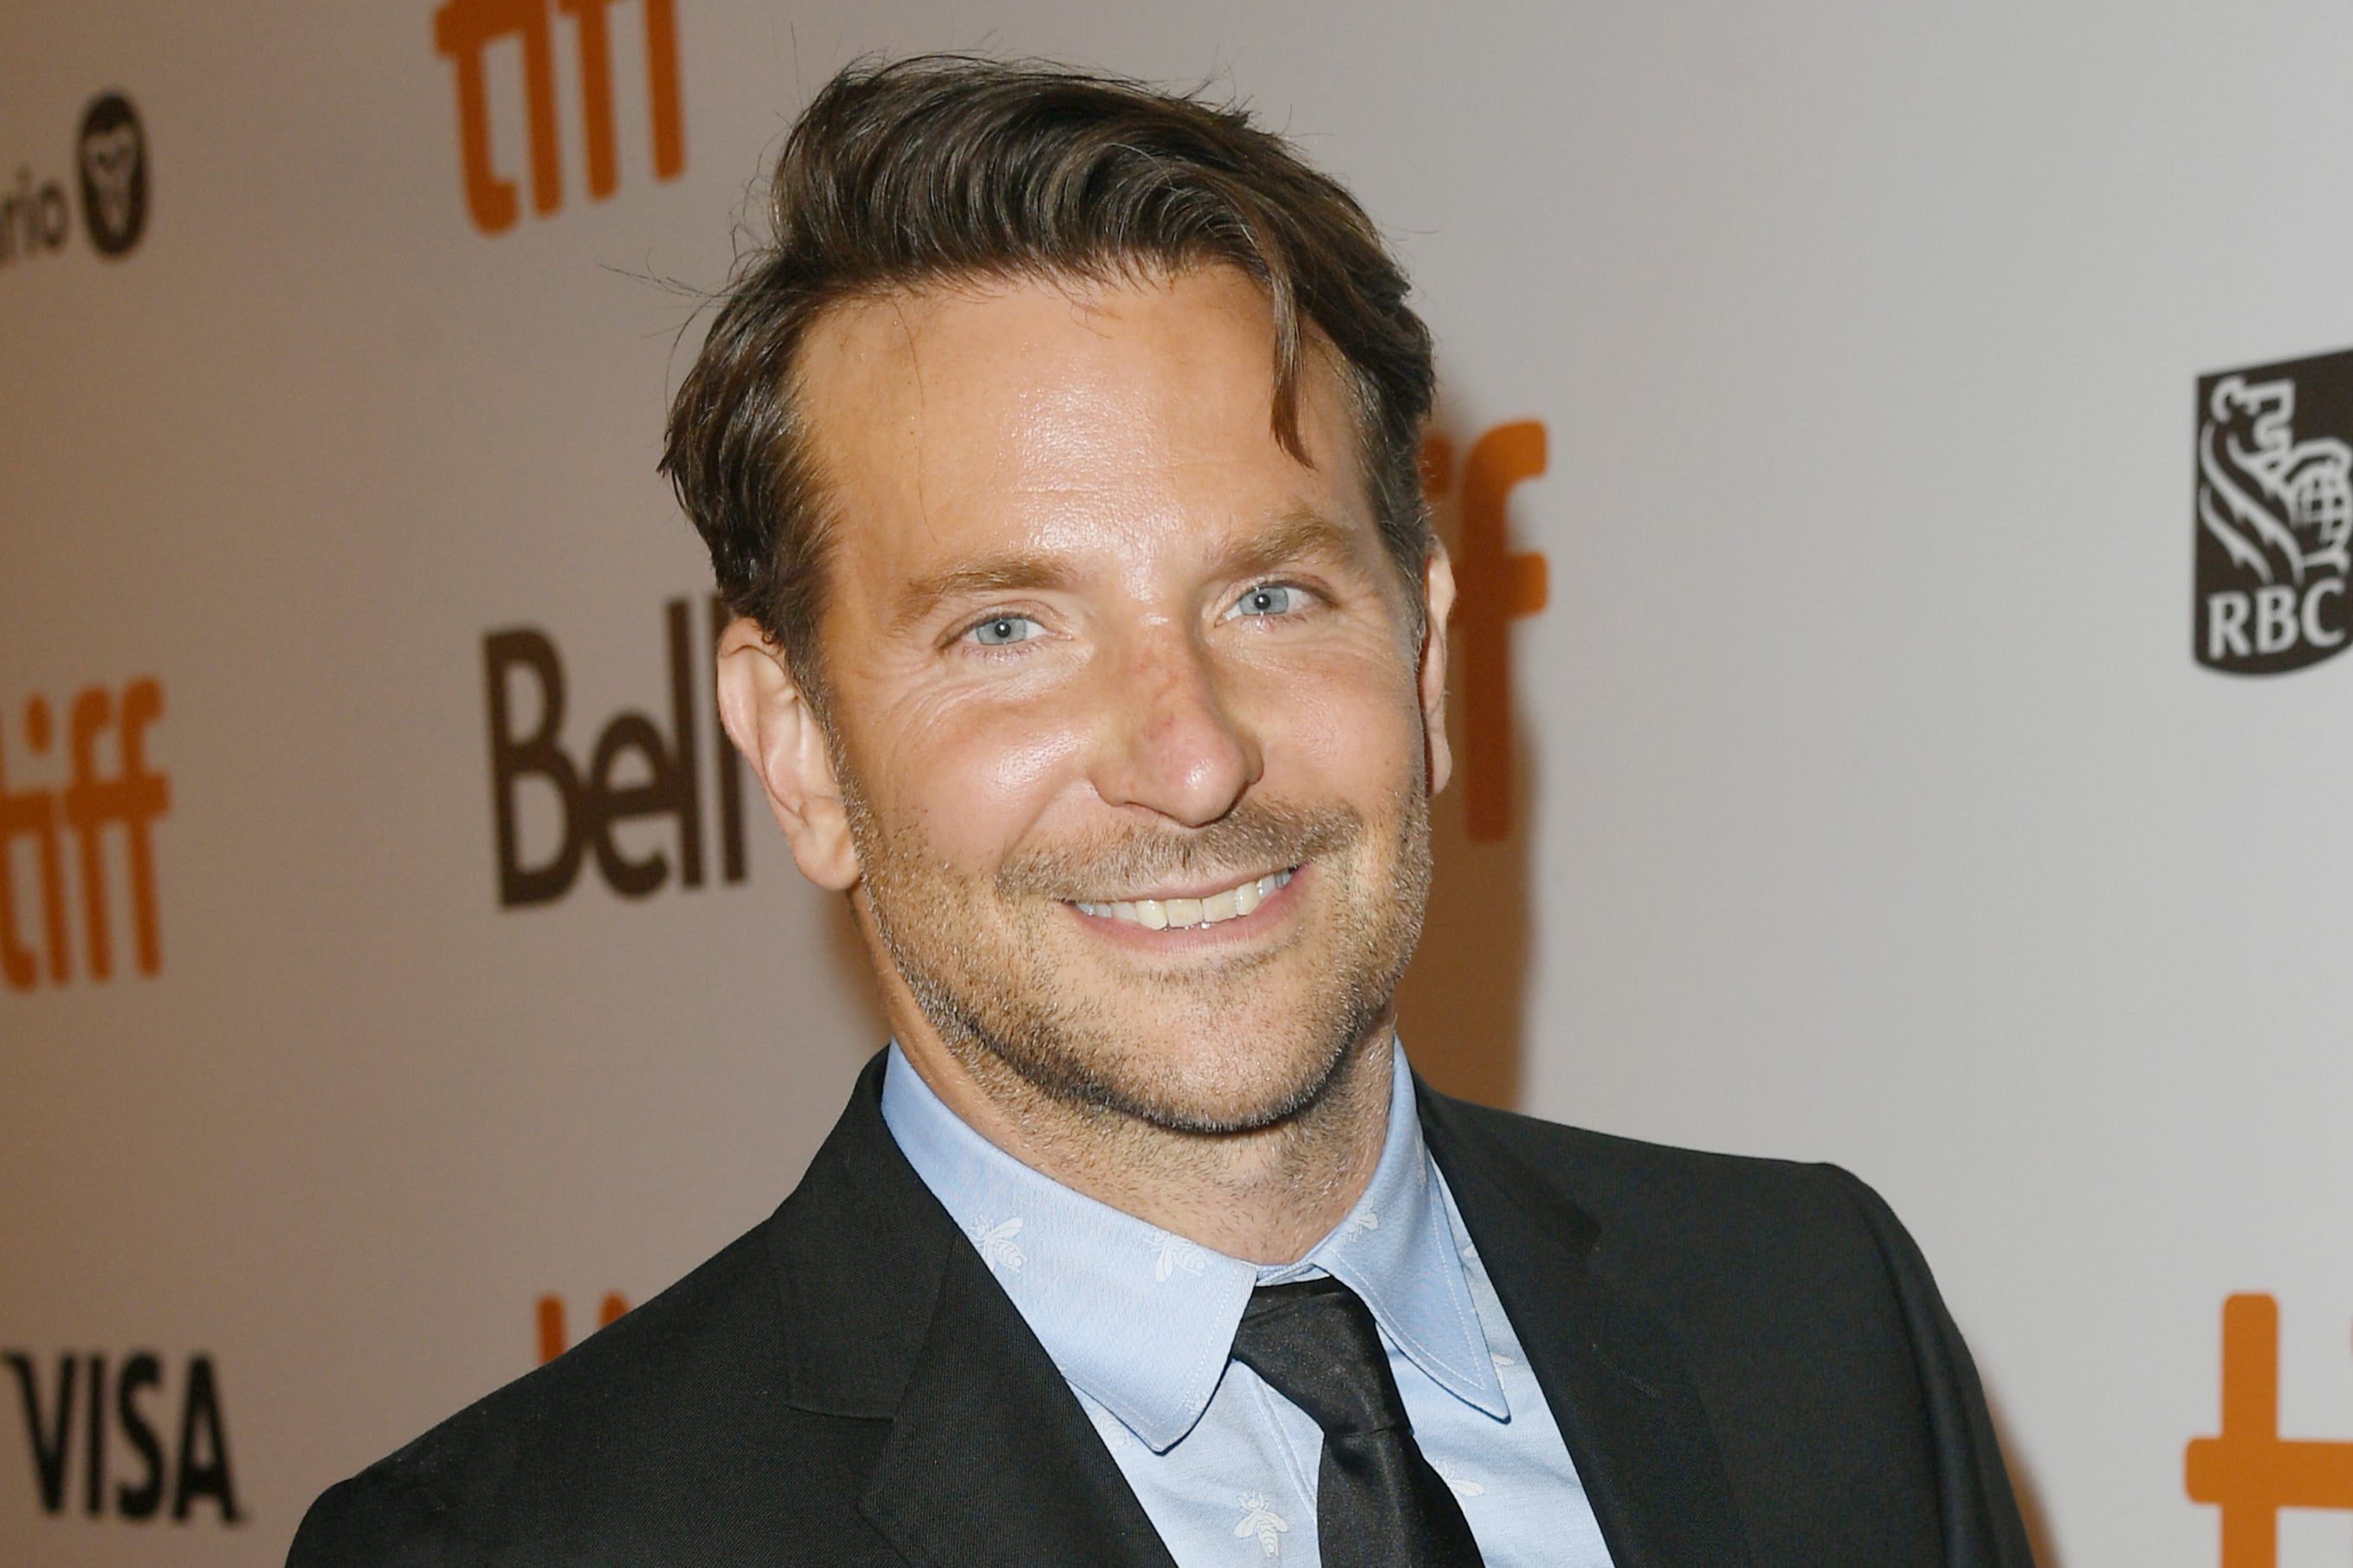 Cool and Unique Things to Know About Bradley Cooper